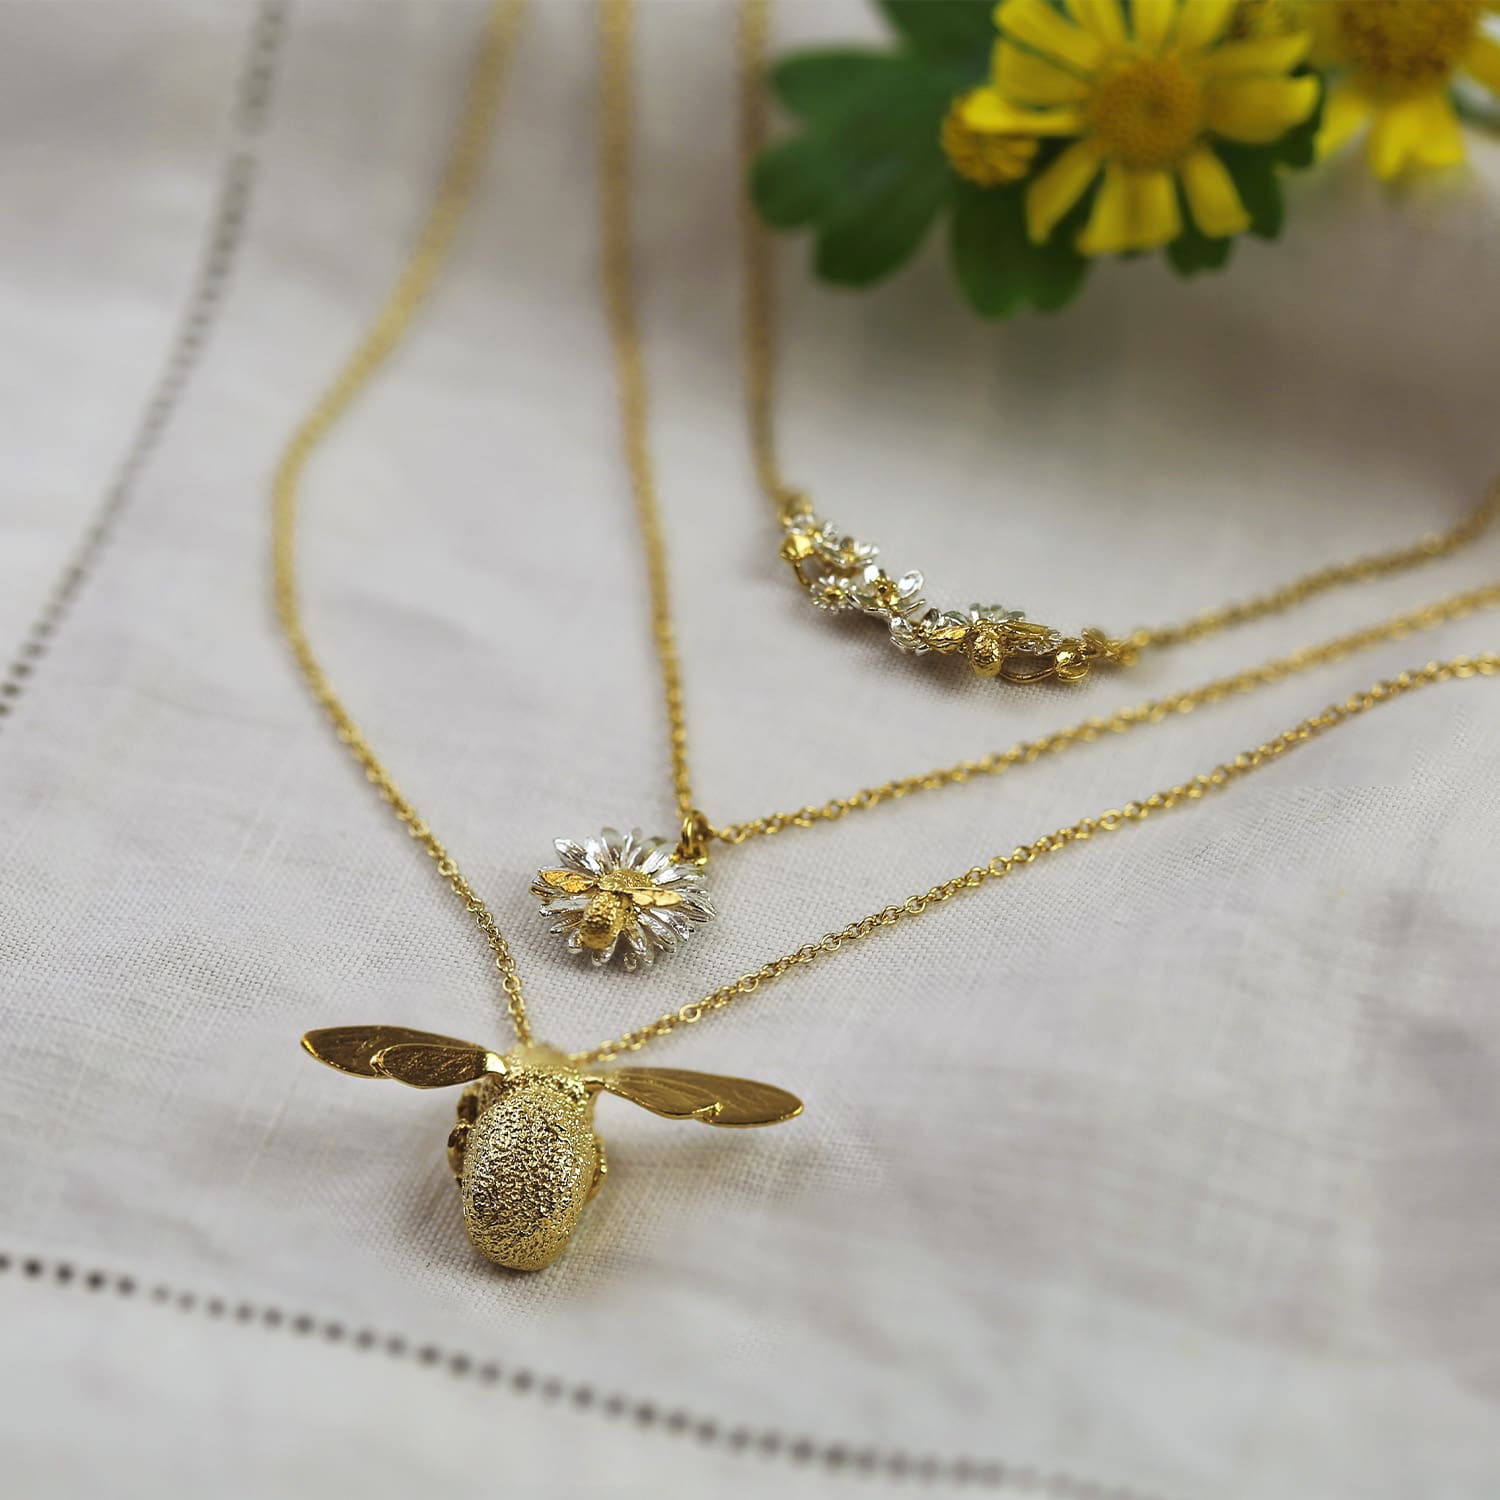 Alex Monroe's iconic original gold plated bumblebee necklace and a garden gathering necklaces